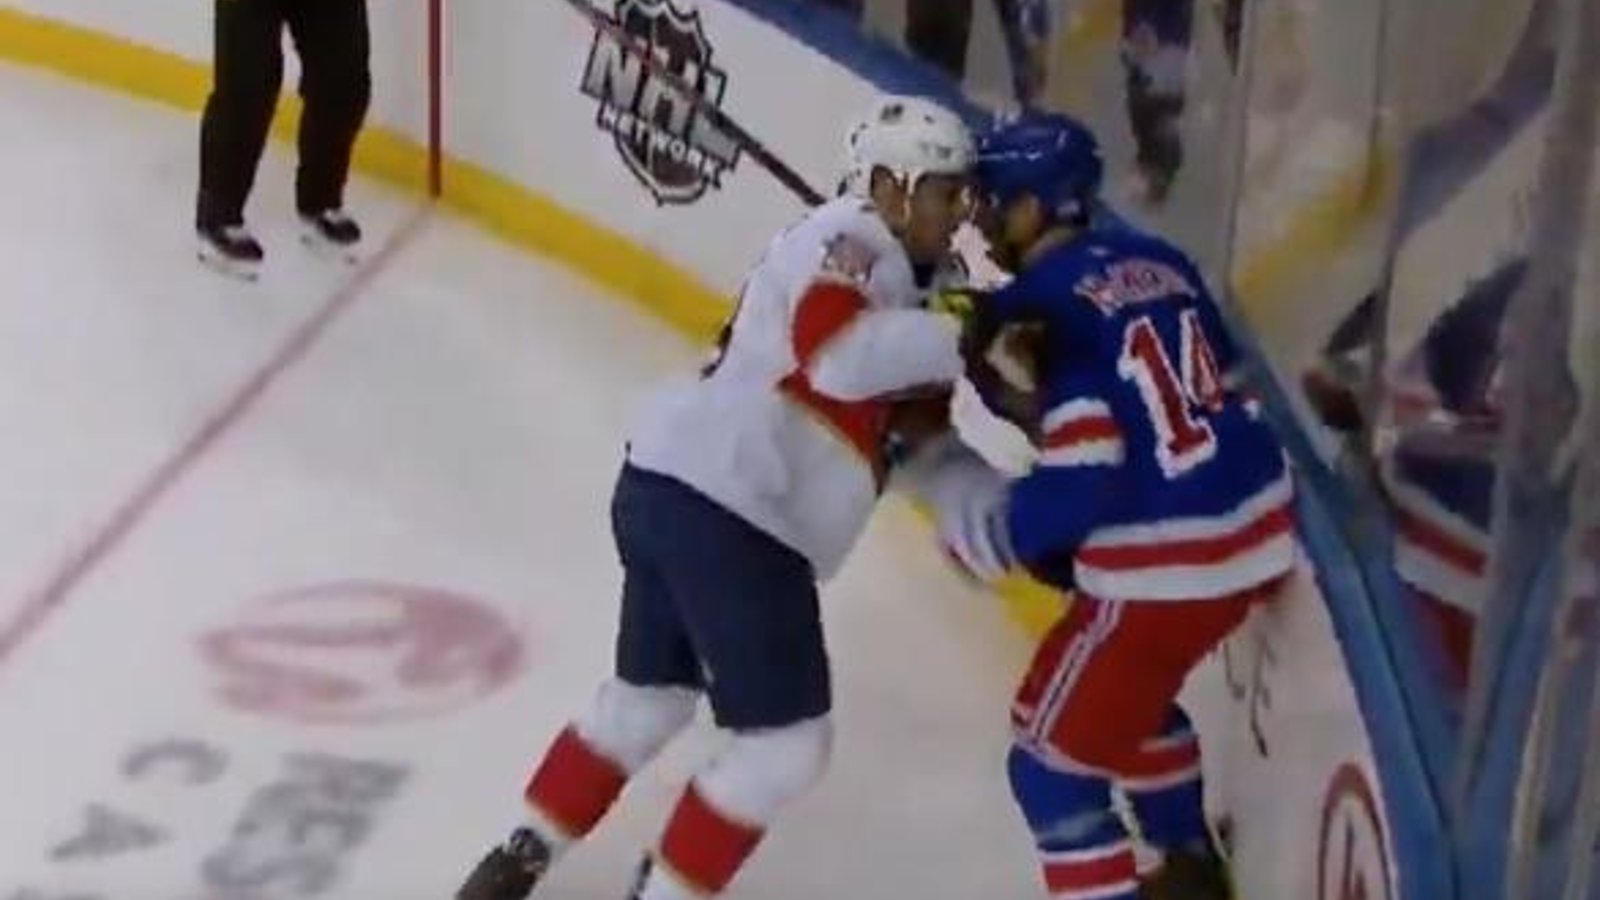 MUST SEE | Crazy goals, injuries, hits and fights in relentless Rangers-Panthers matchup